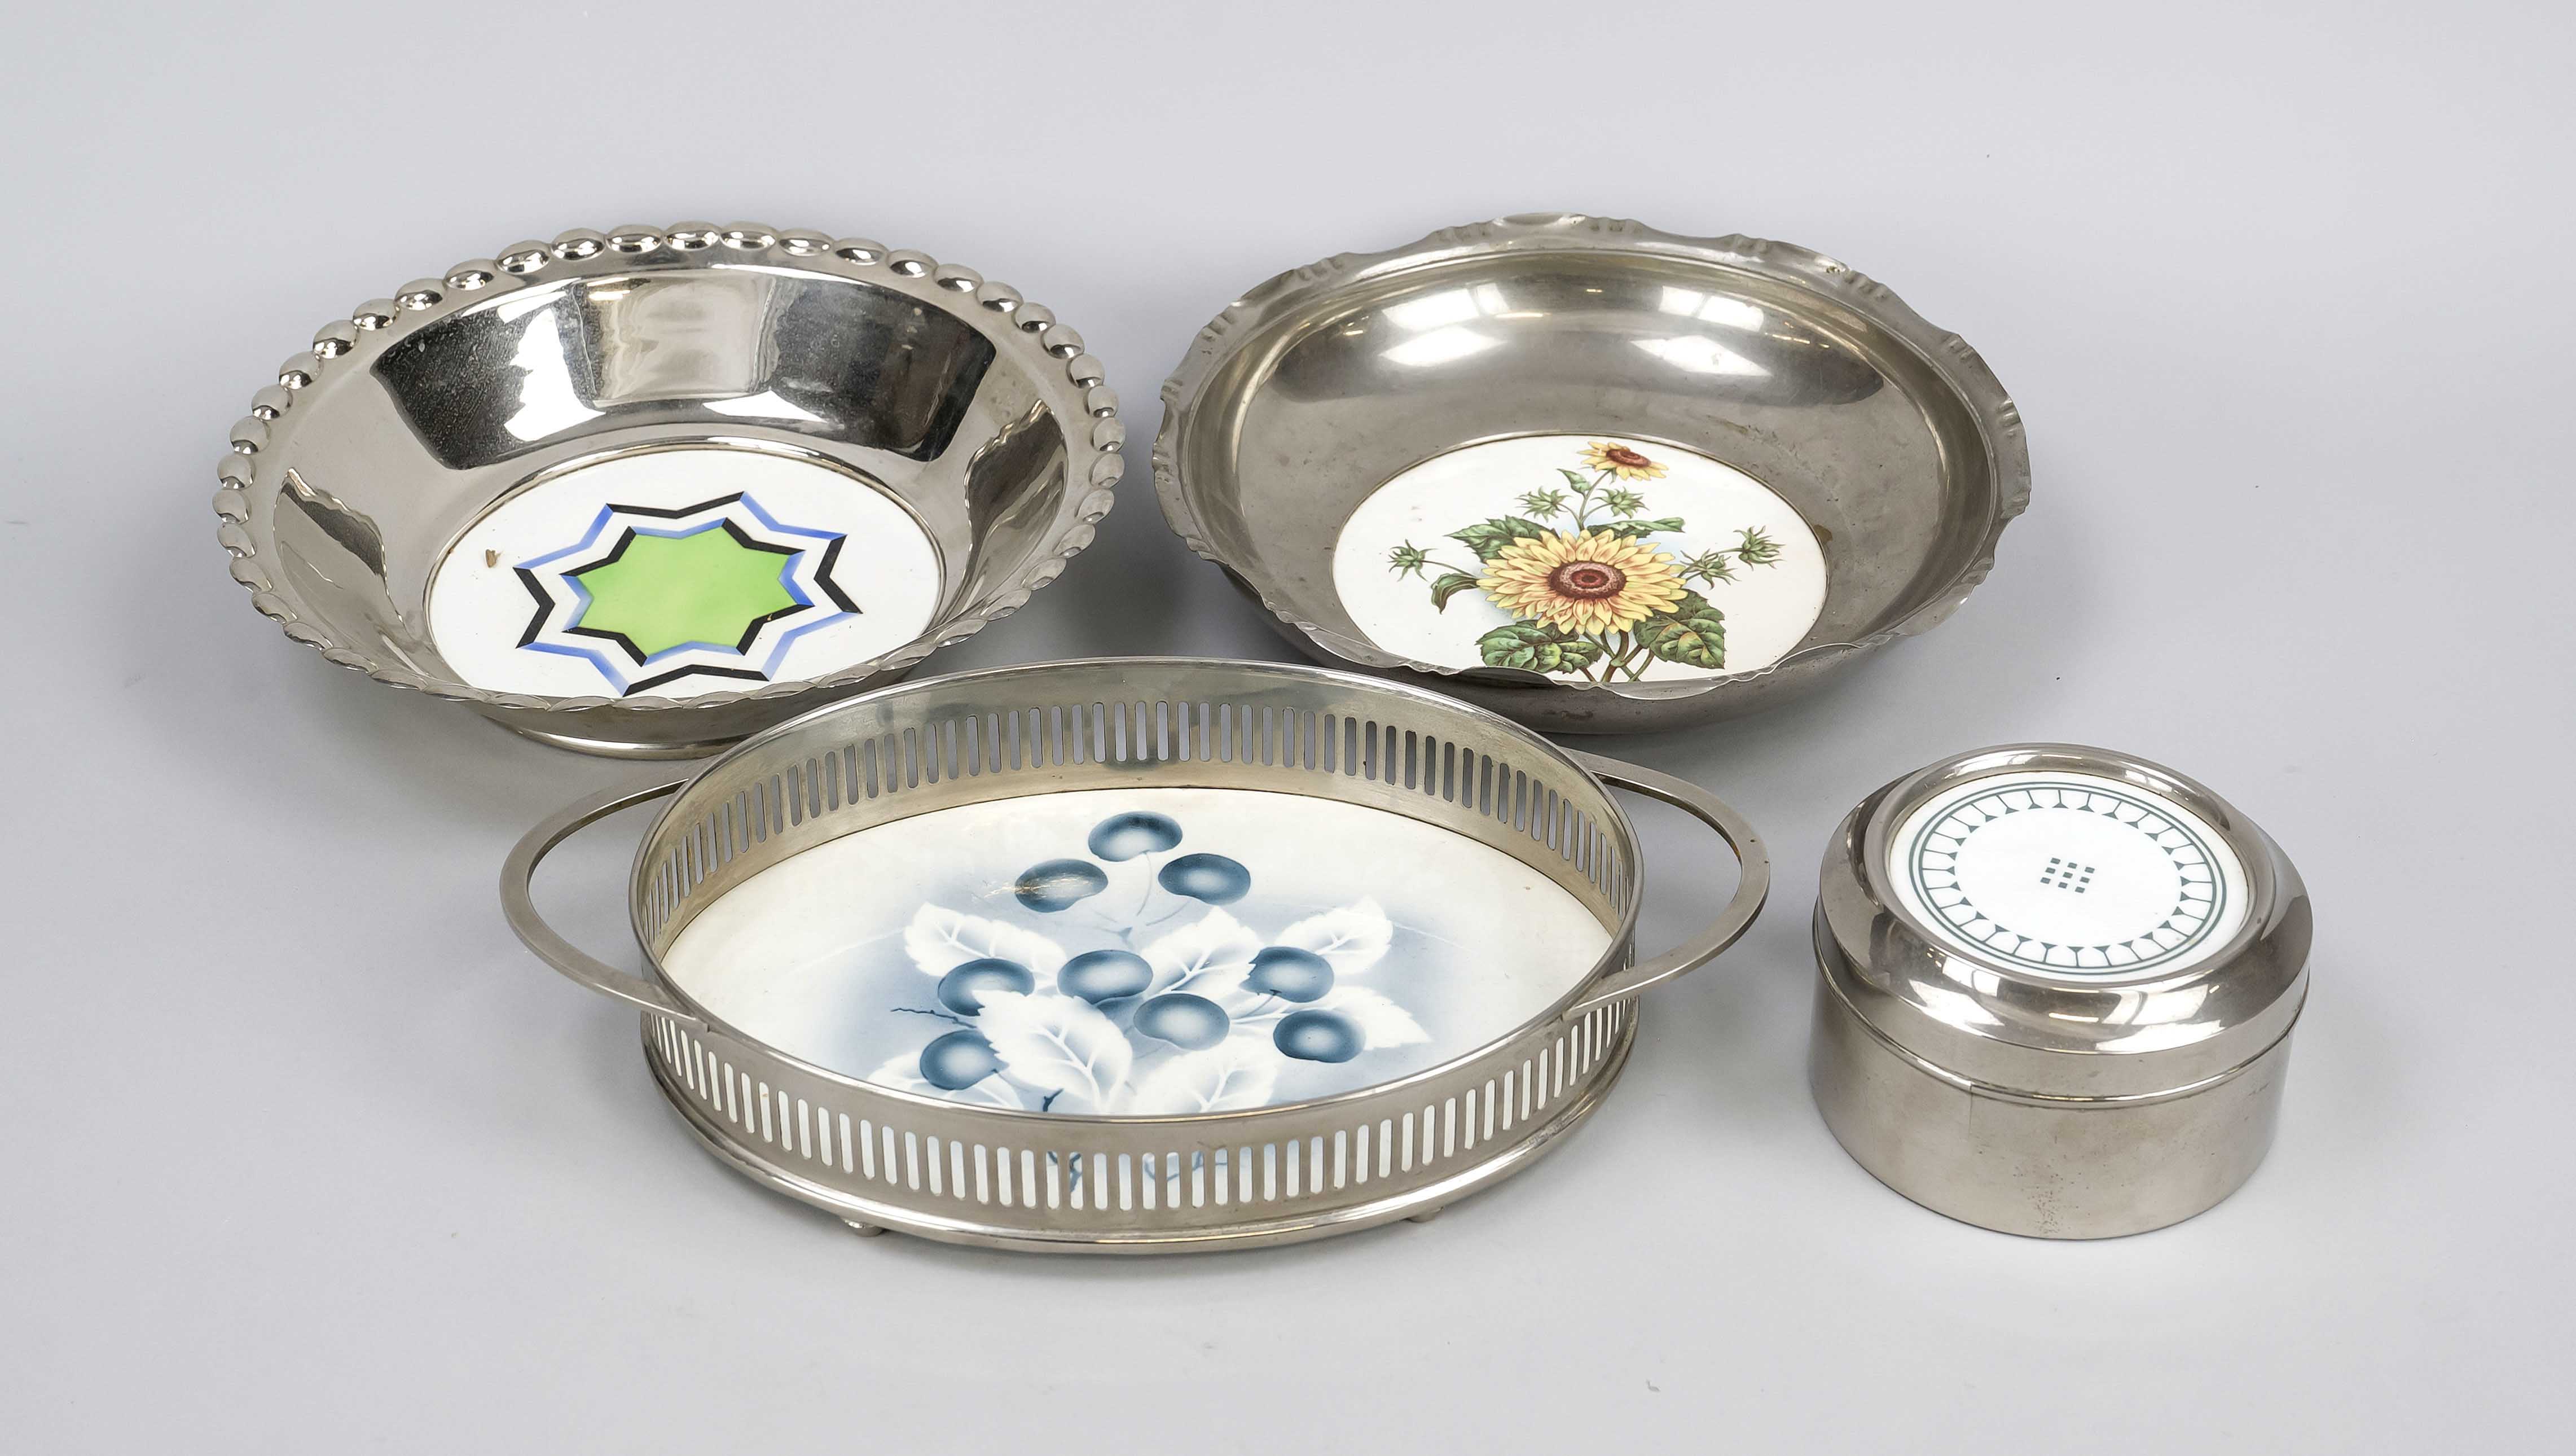 Three Art Nouveau bowls and a lidded box, c. 1910, nickel-plated metal, painted ceramic bases, l. up